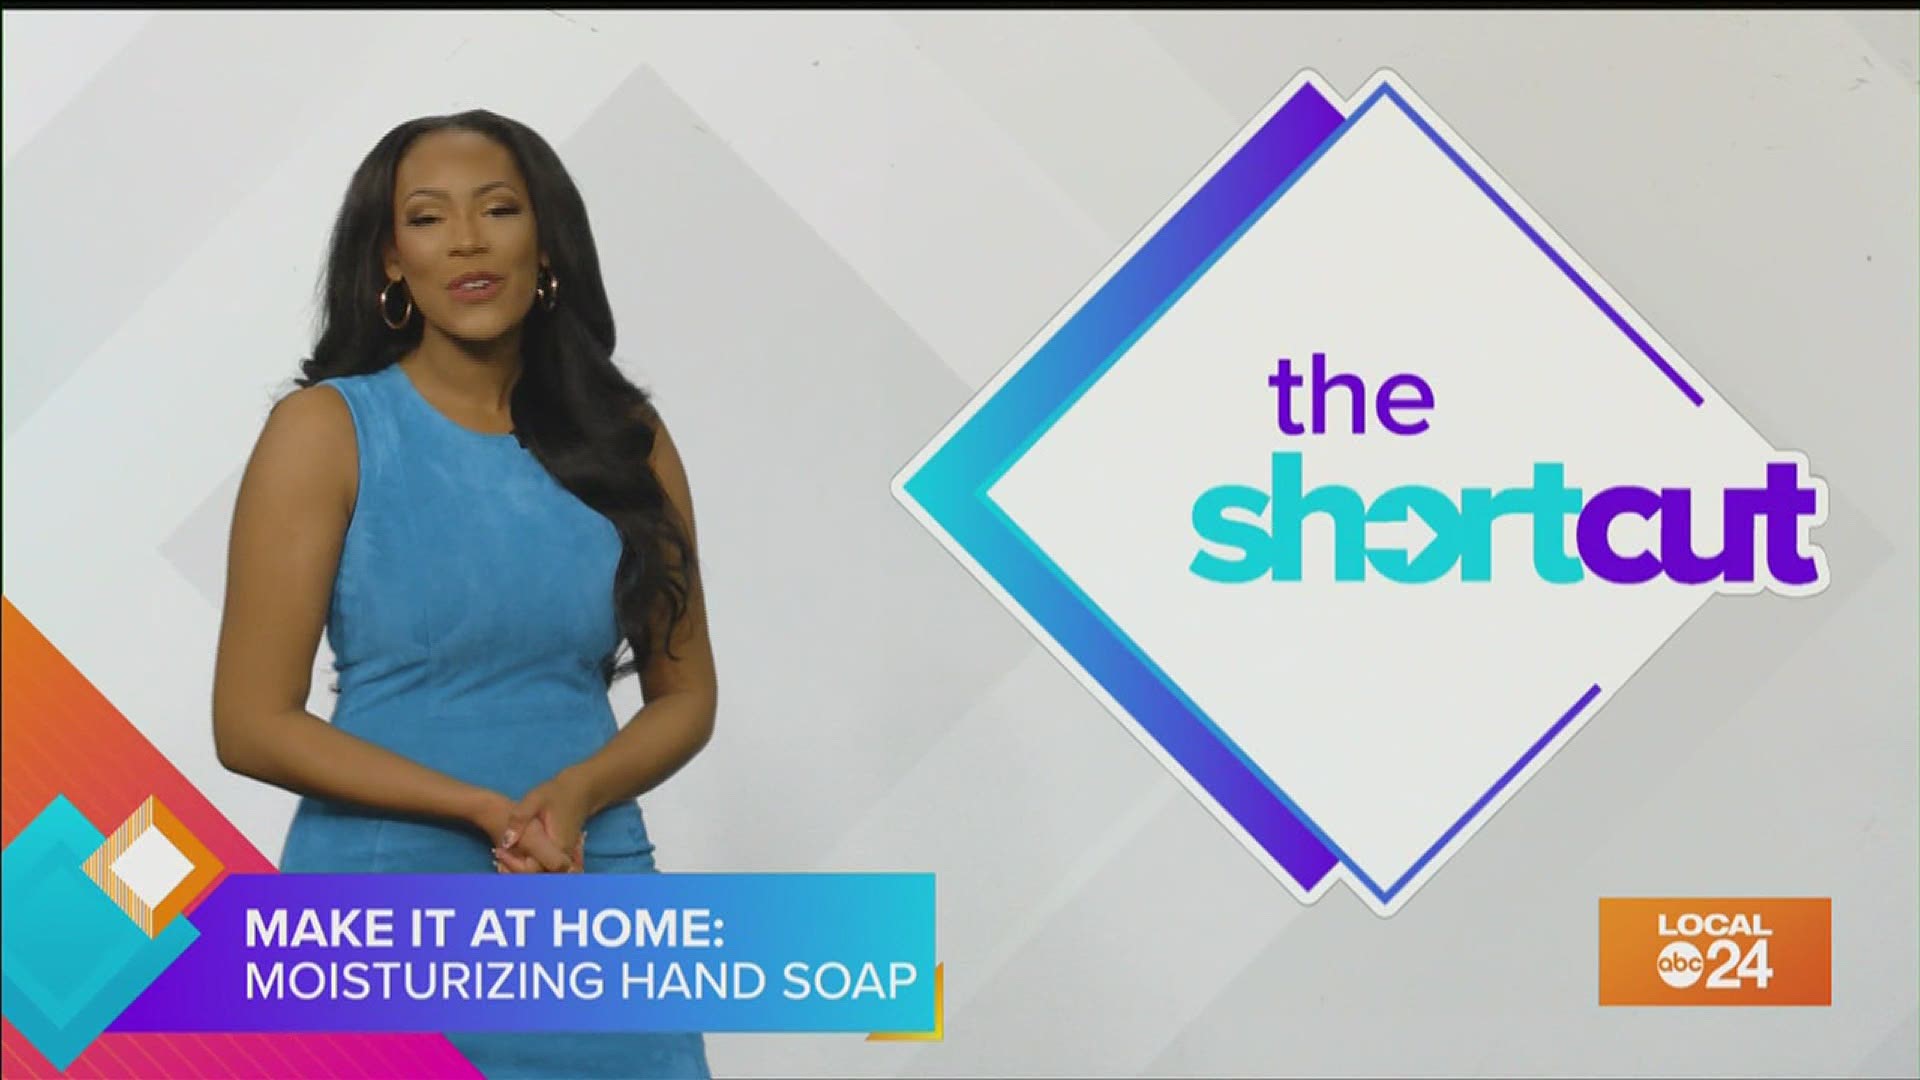 Want to impress your friends and keep your hands smelling nice and clean? Check out this DIY hand soap recipe! It also makes a great Mother's Day gift, by the way.